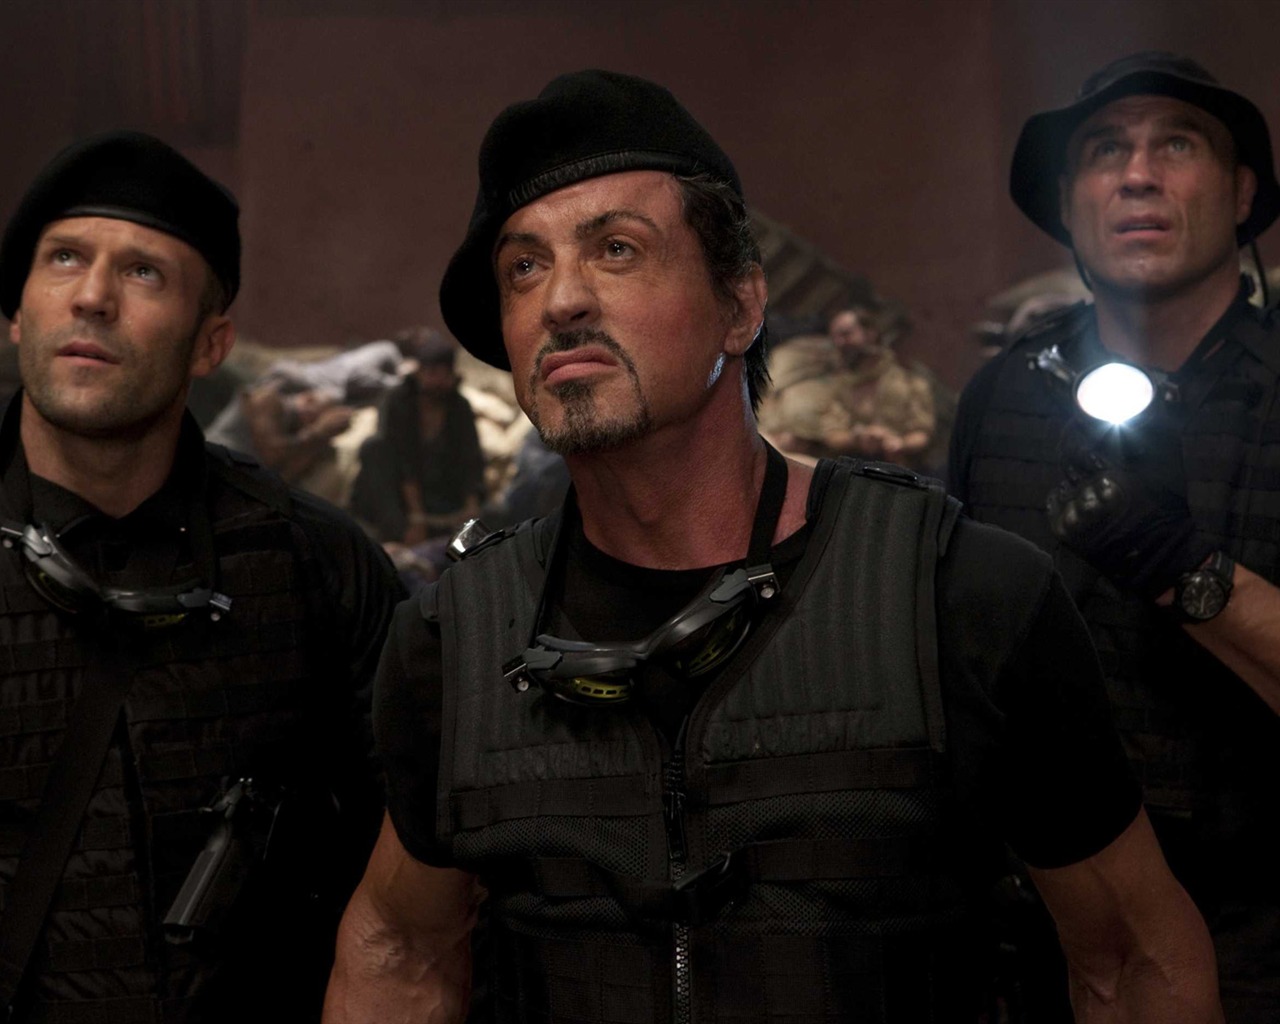 The Expendables 敢死队 高清壁纸5 - 1280x1024